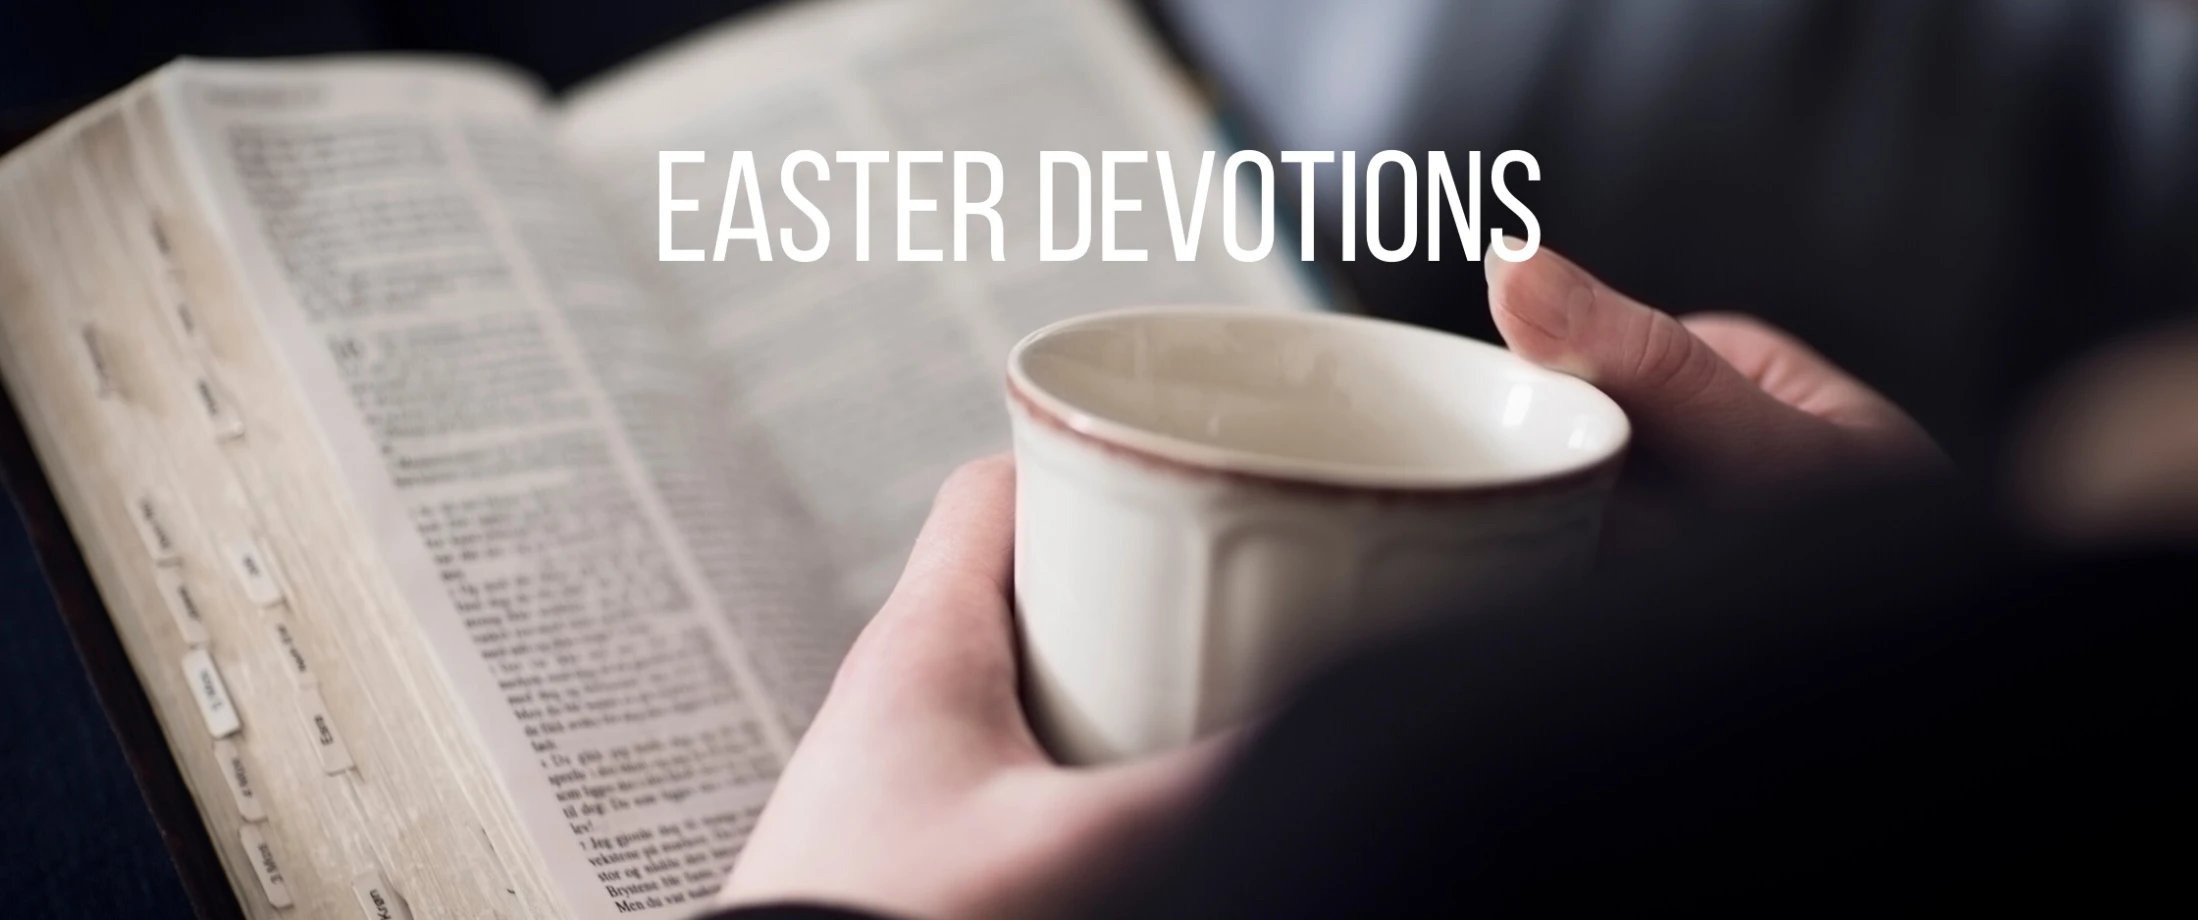 Easter Devotions: The Promise of Eternity in the Creed